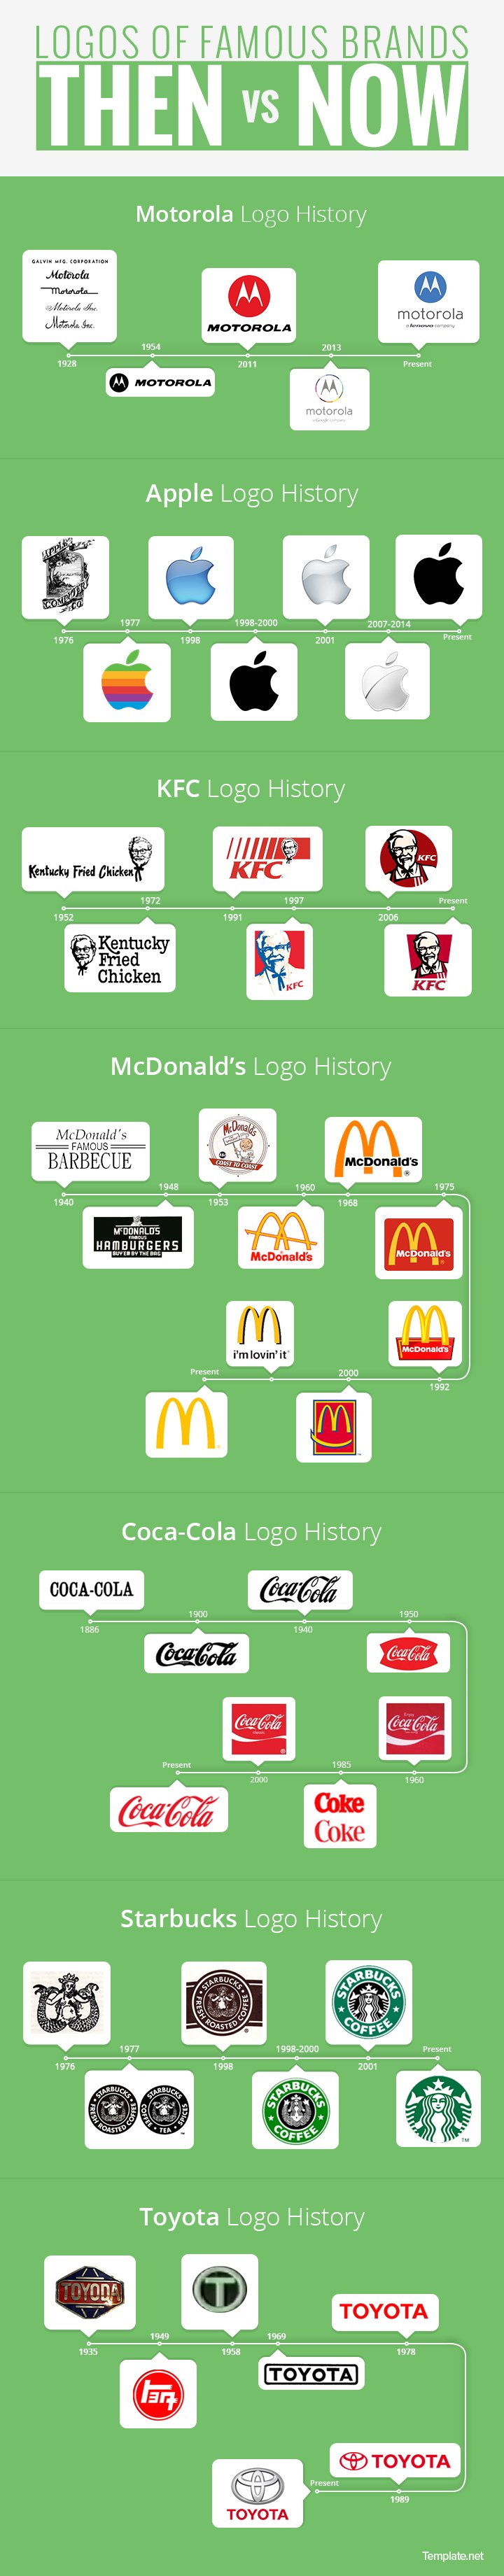 logos of famous brands then vs now